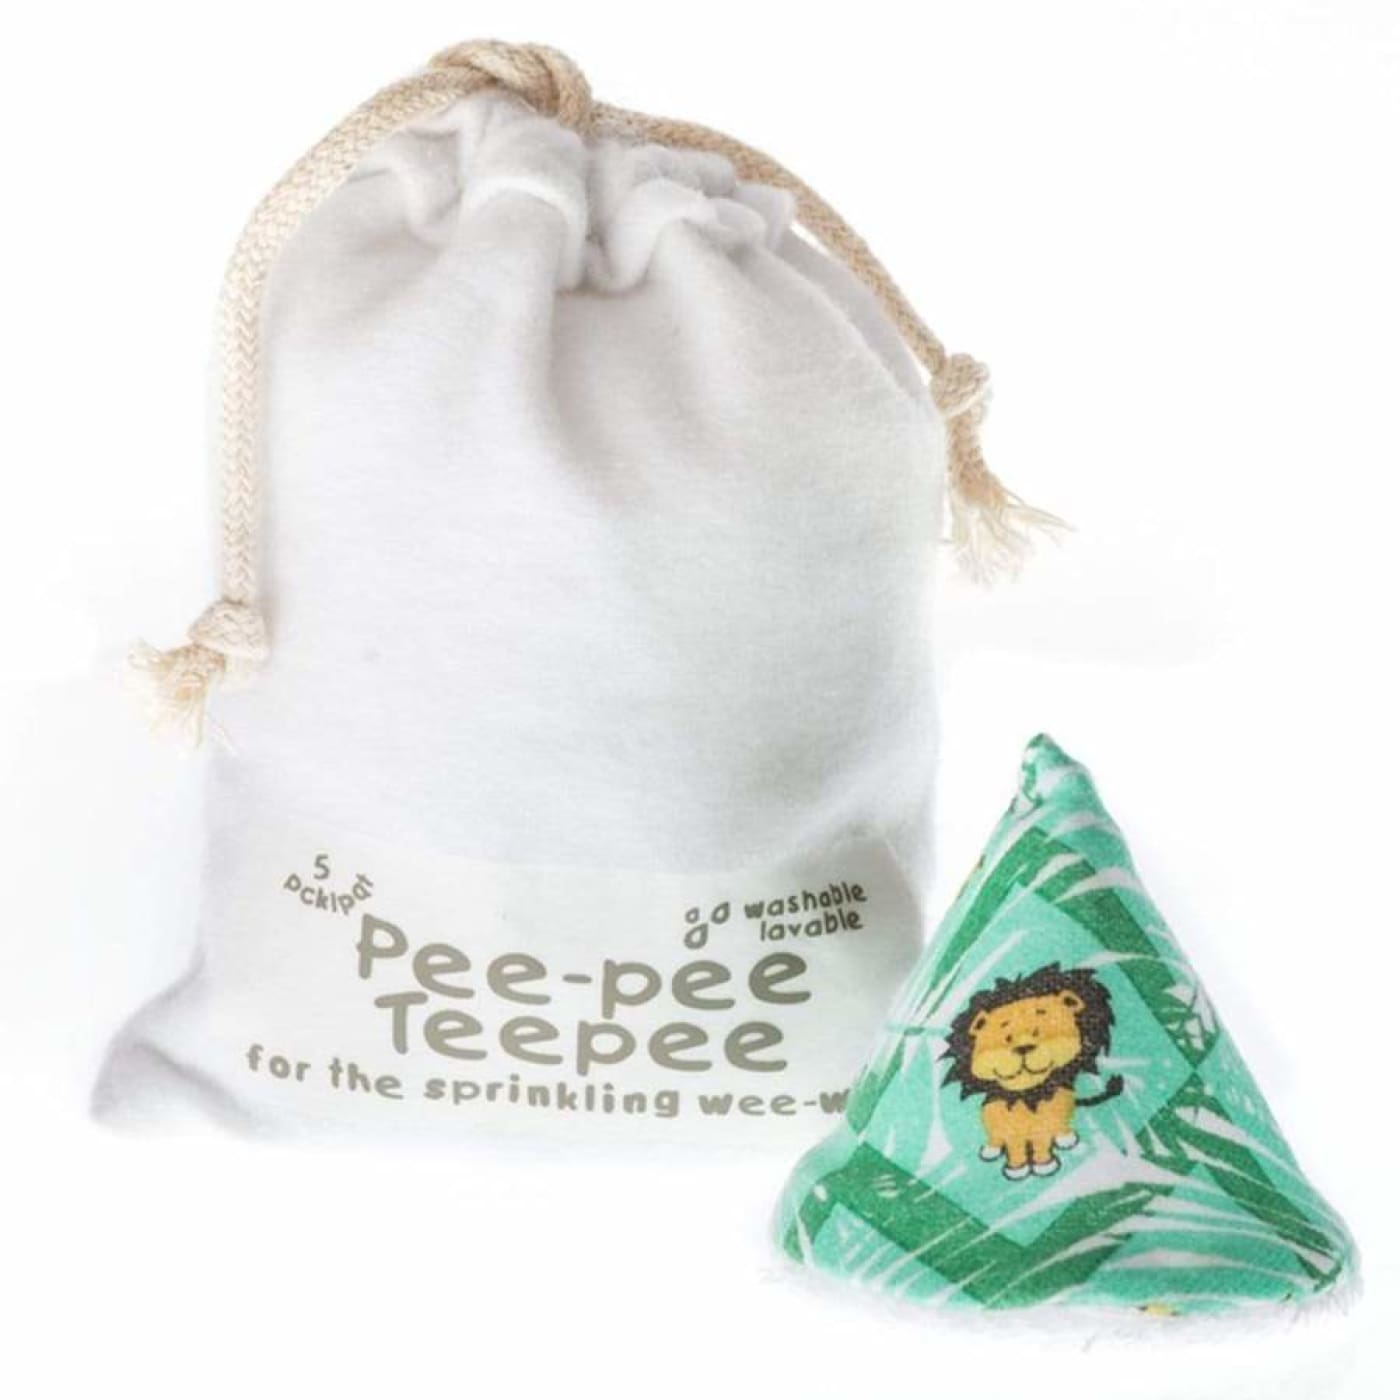 Pee-pee Teepee with Laundry Bag - Jungle - Jungle - BATHTIME & CHANGING - NAPPIES/WIPES/ACC